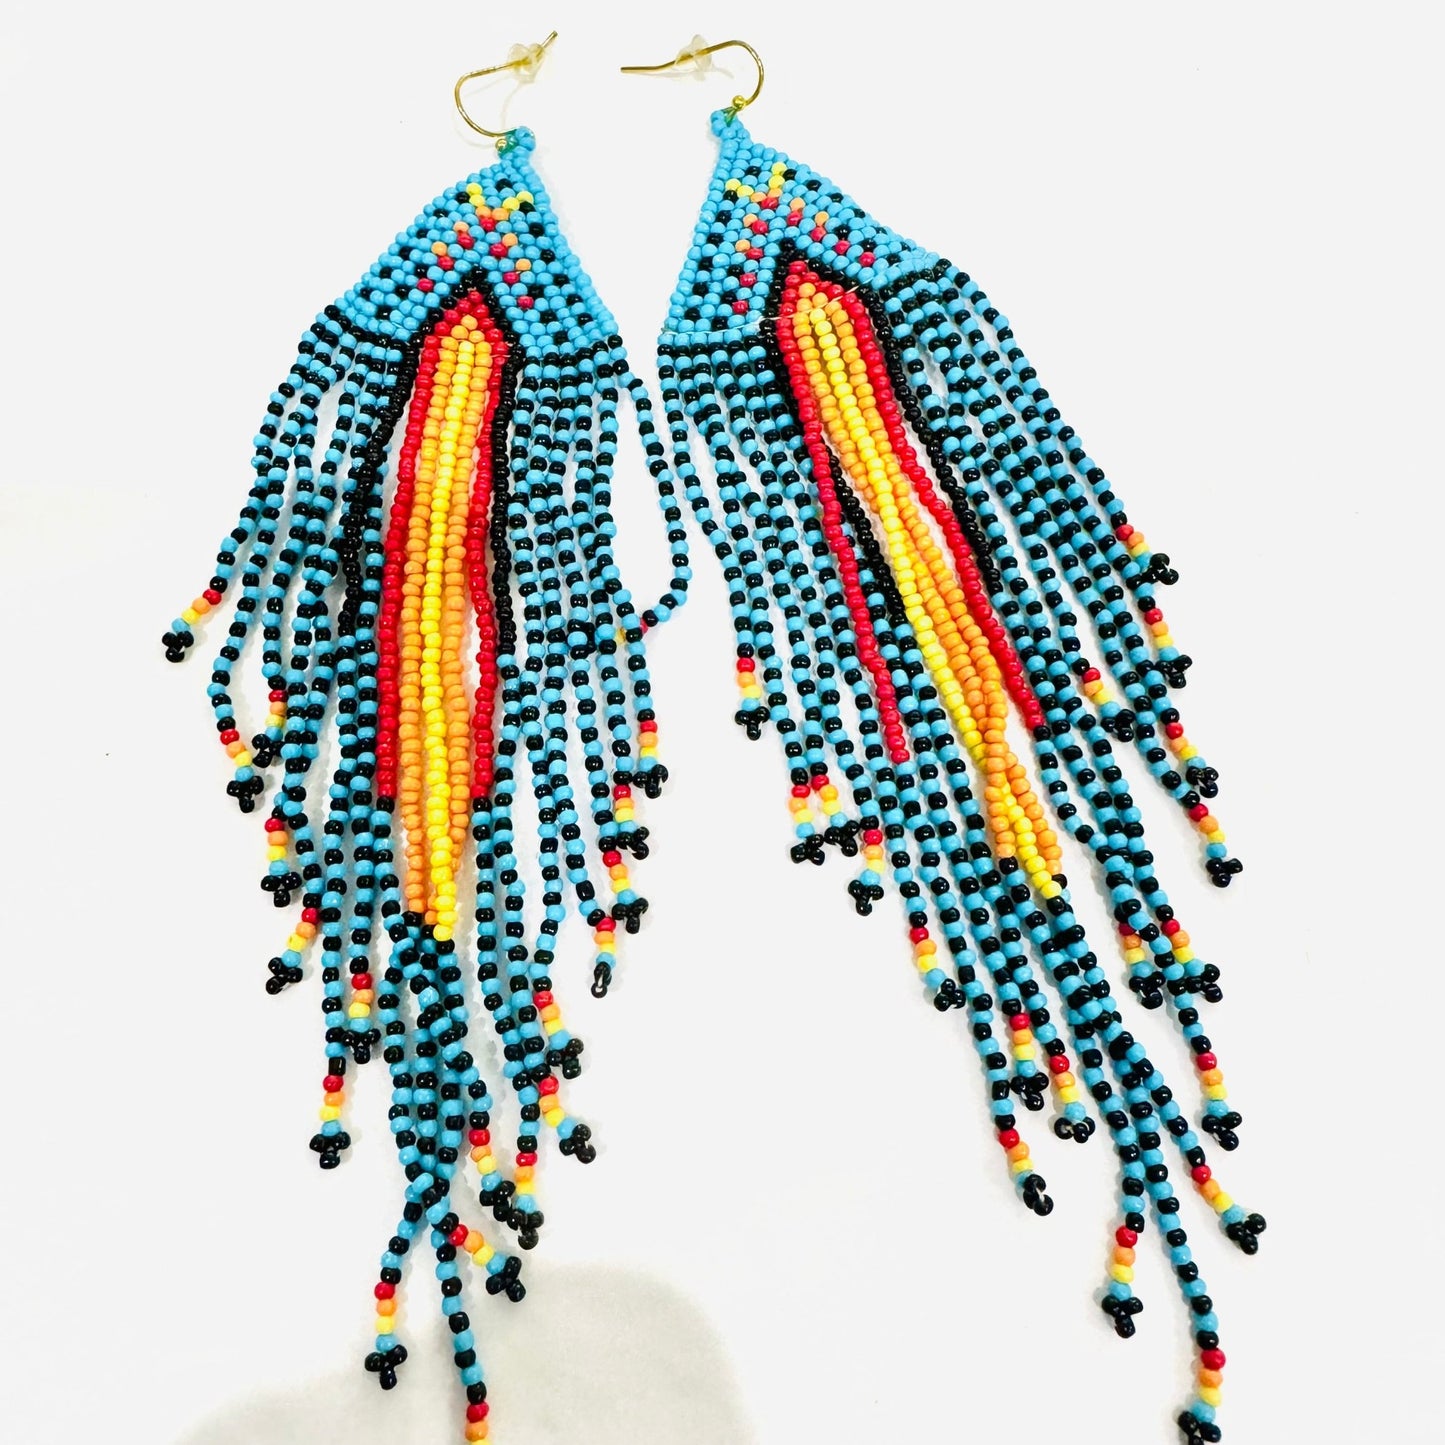 Live SALE Earrings - House of FaSHUN by Shun Melson